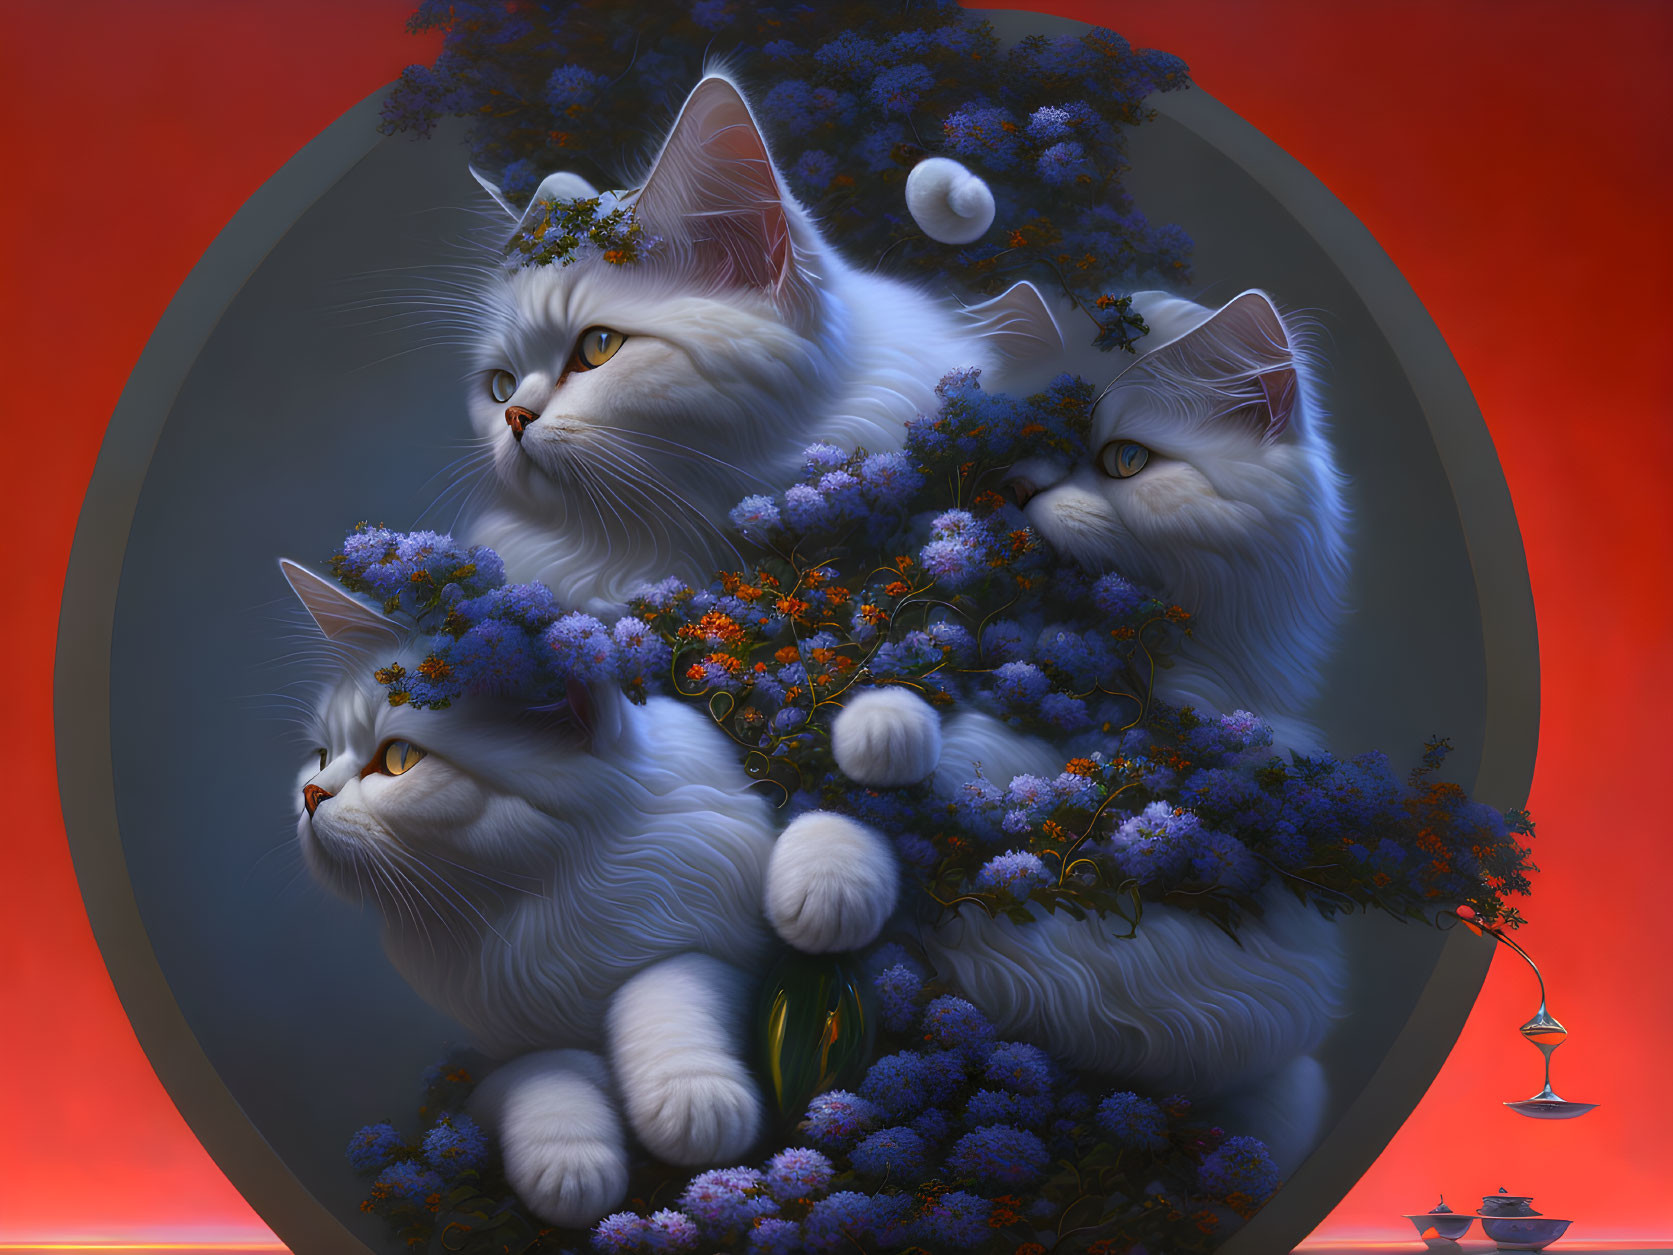 Three White Cats with Blue Flowers on Red Background and Floating Orb - Art Print